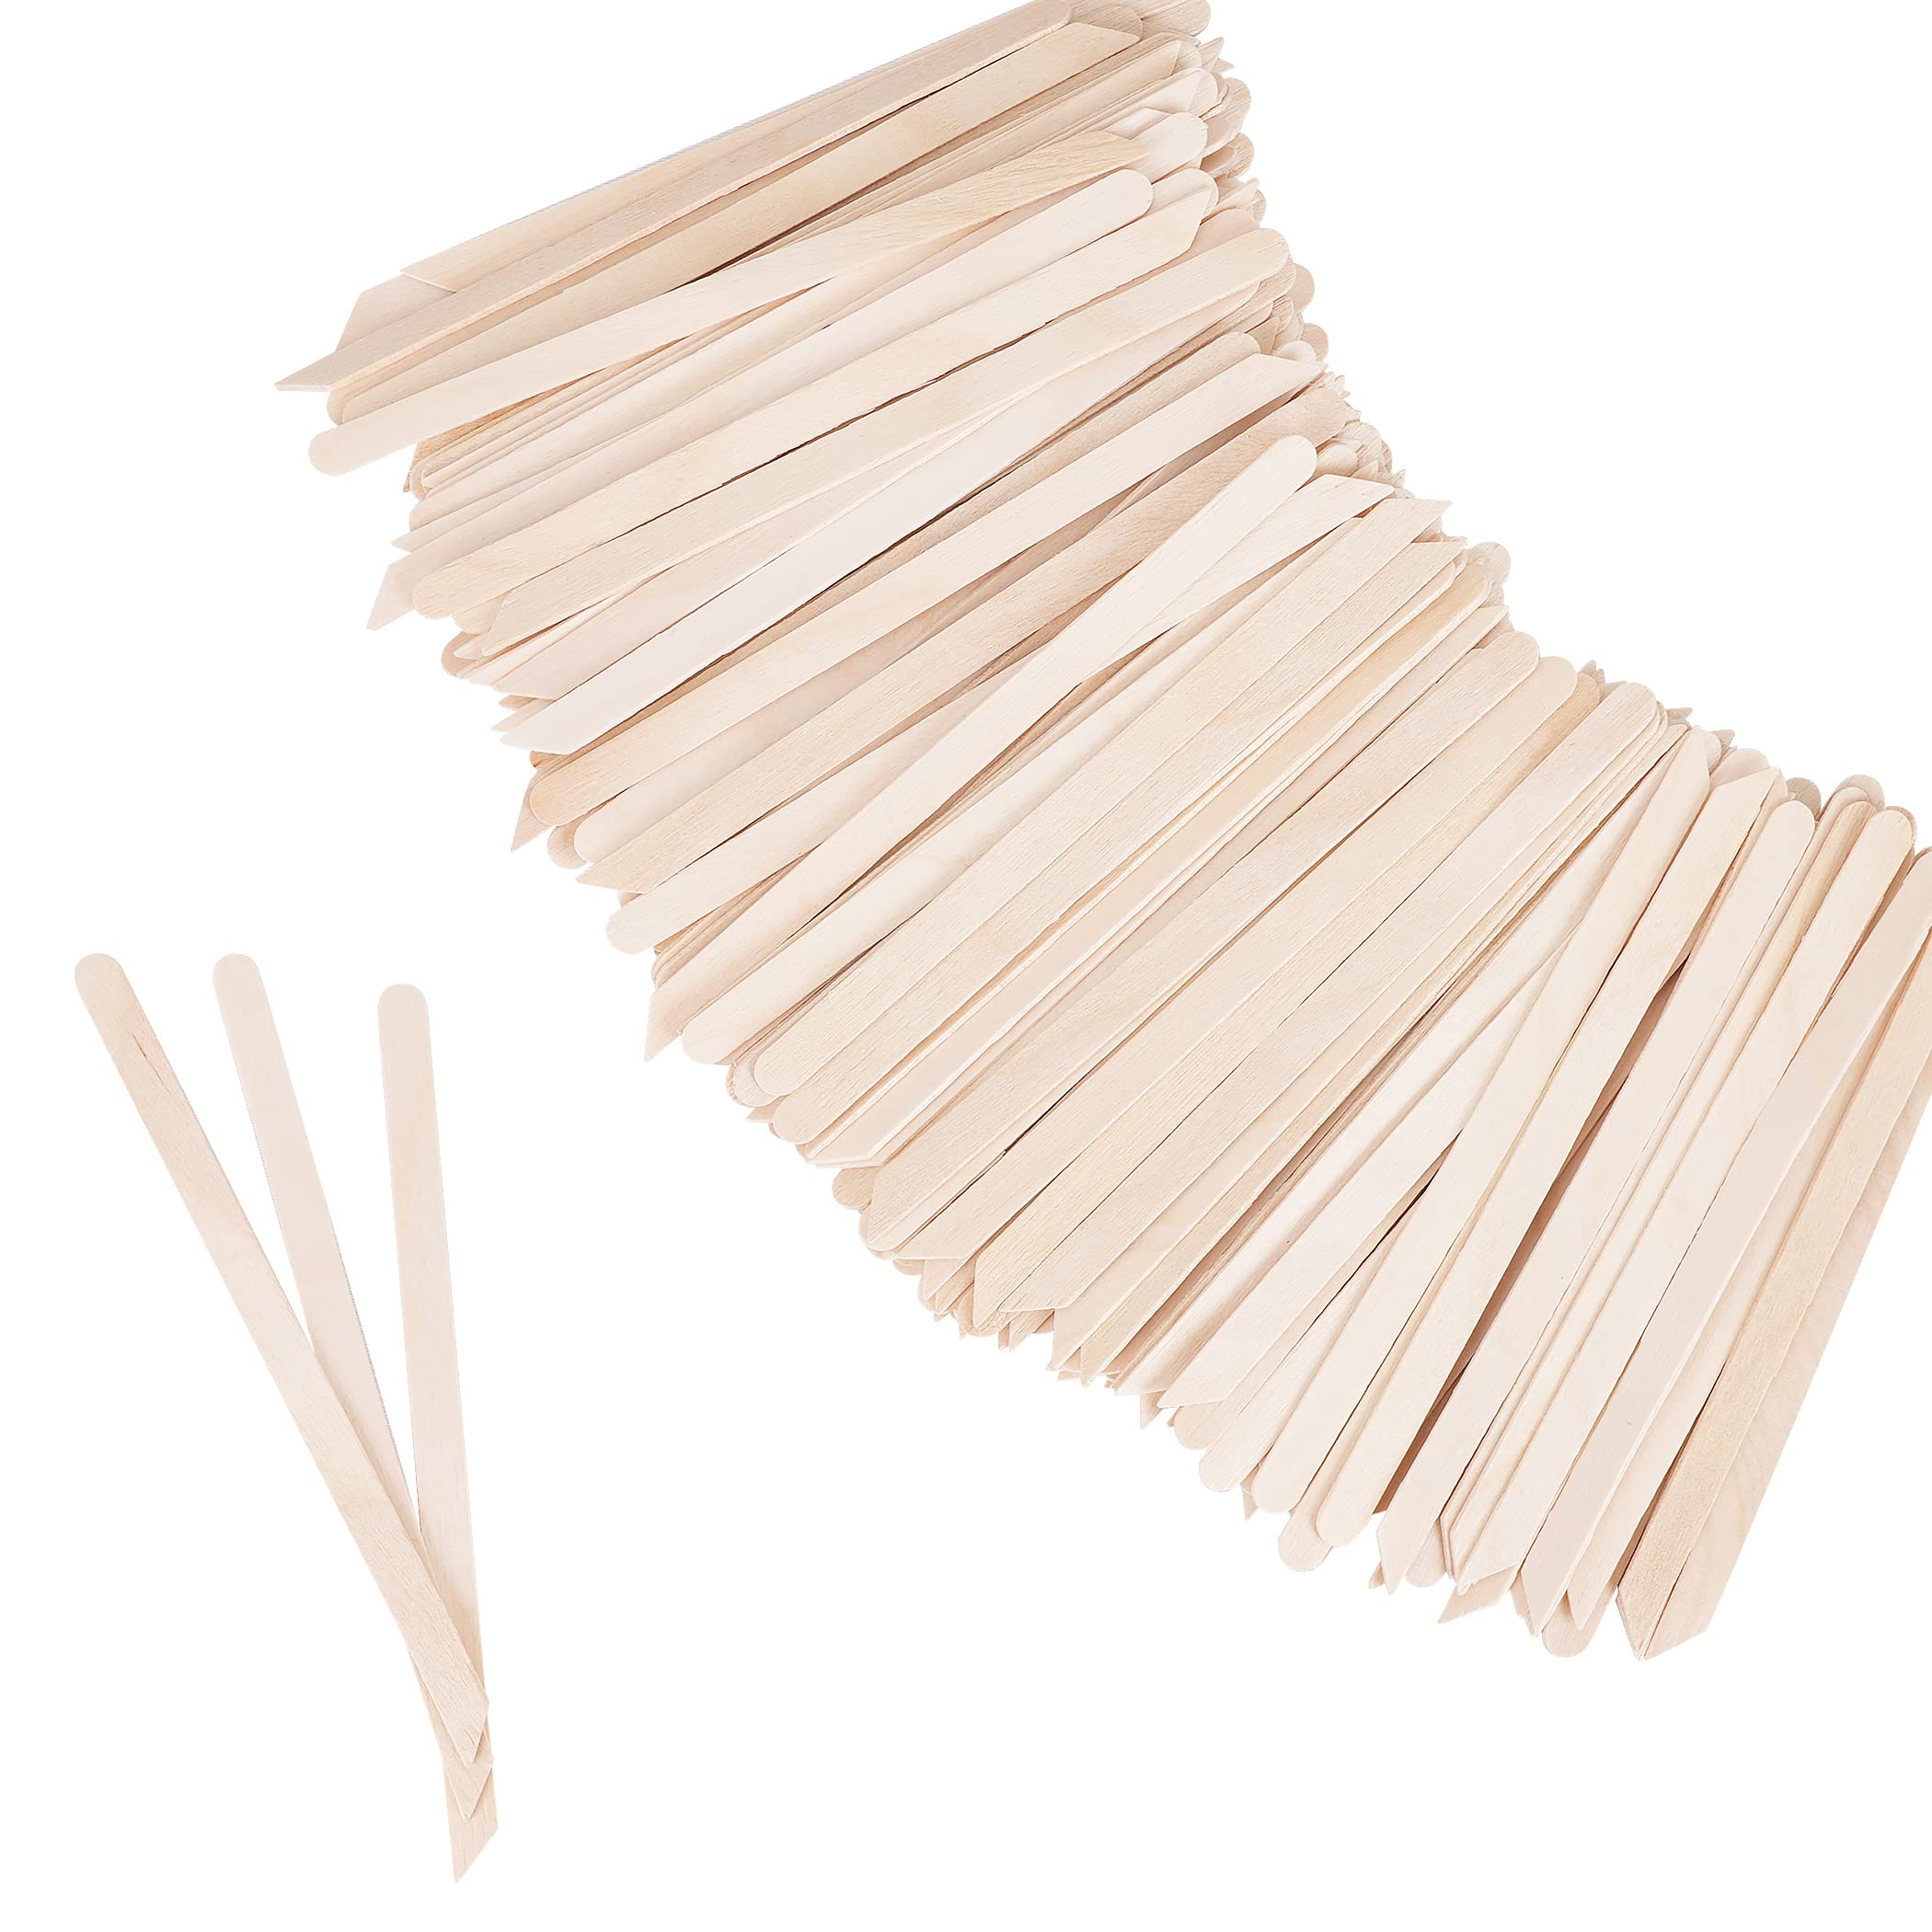 Mibly Wooden Wax Sticks - Eyebrow Lip Nose Small Waxing Applicator Sticks for Hair Removal and Smooth Skin - Spa and Home Usage (Pack of 200)